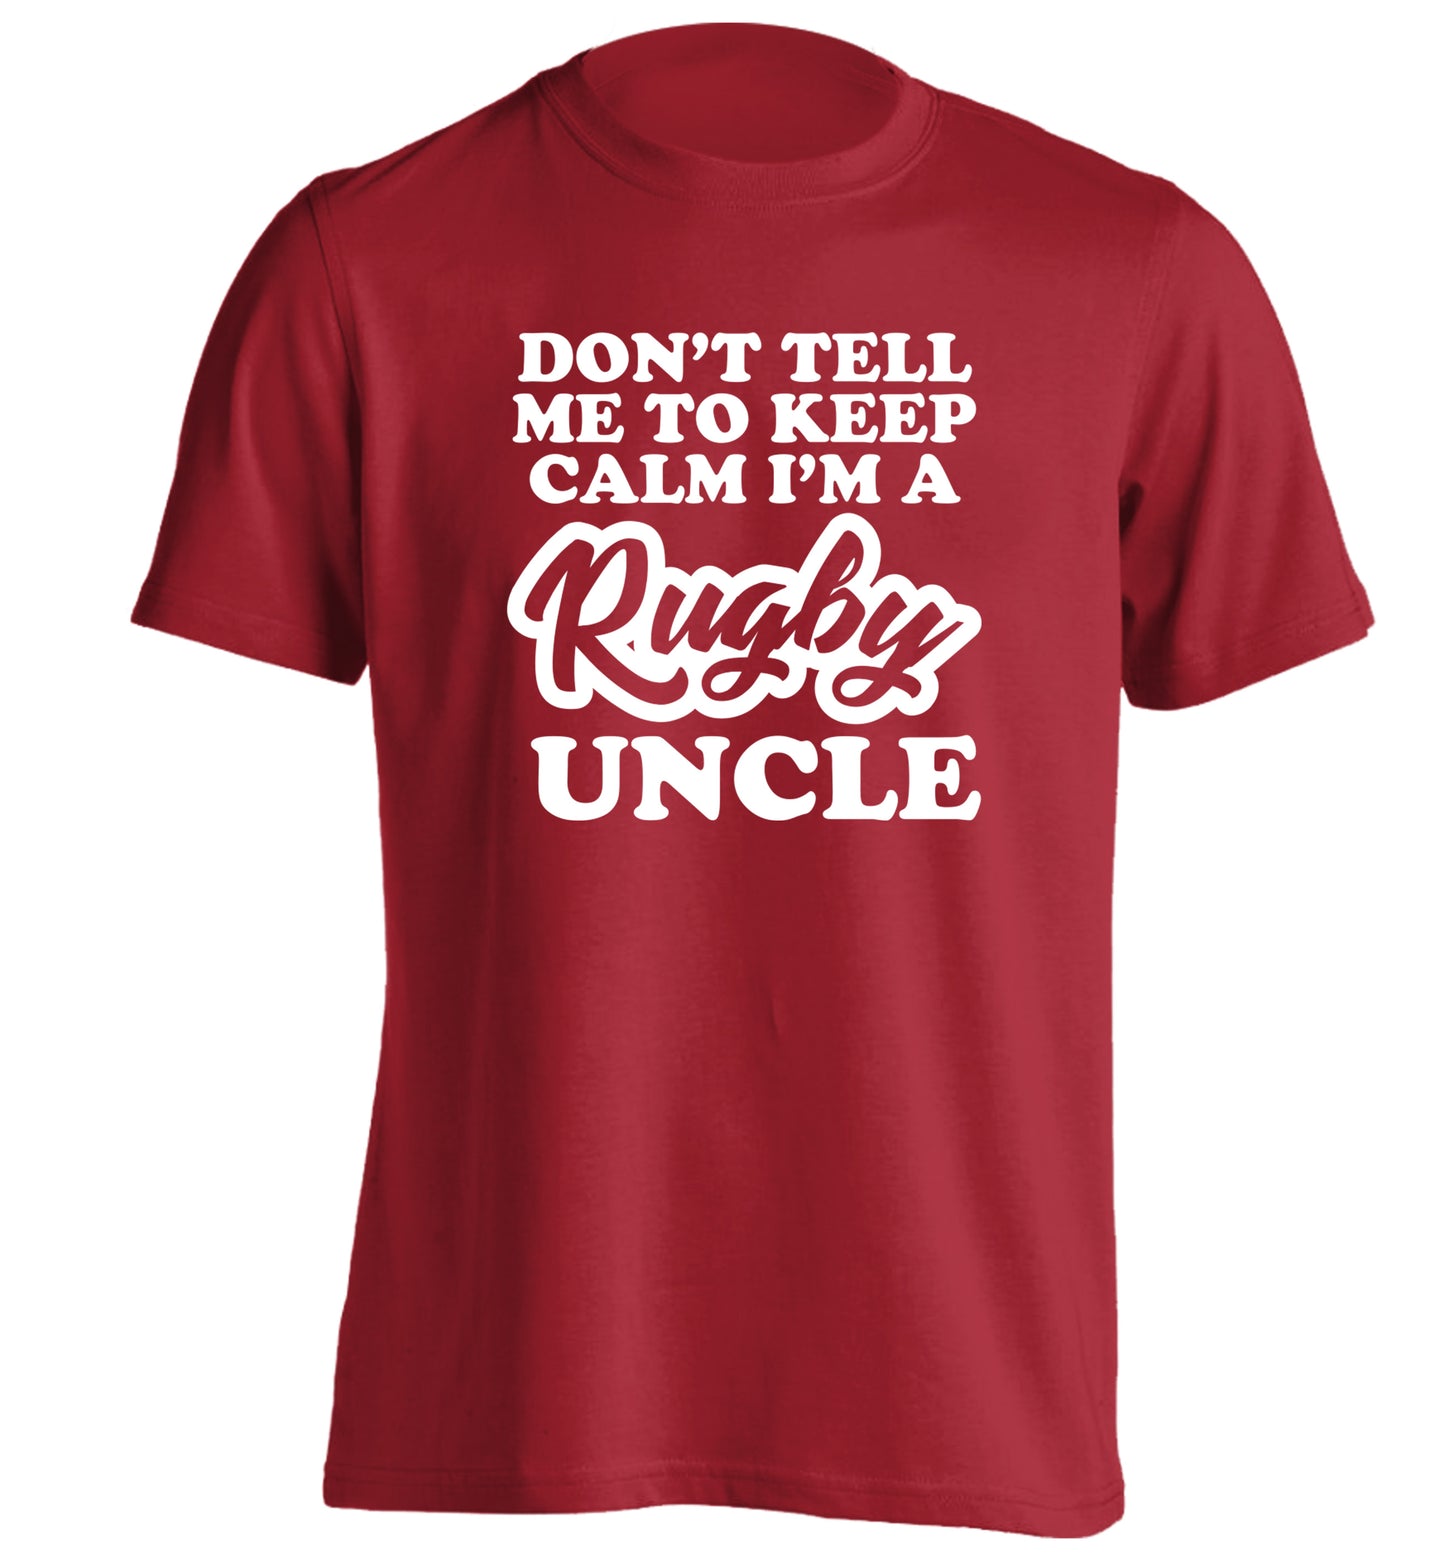 Don't tell me to keep calm I'm a rugby uncle adults unisex red Tshirt 2XL